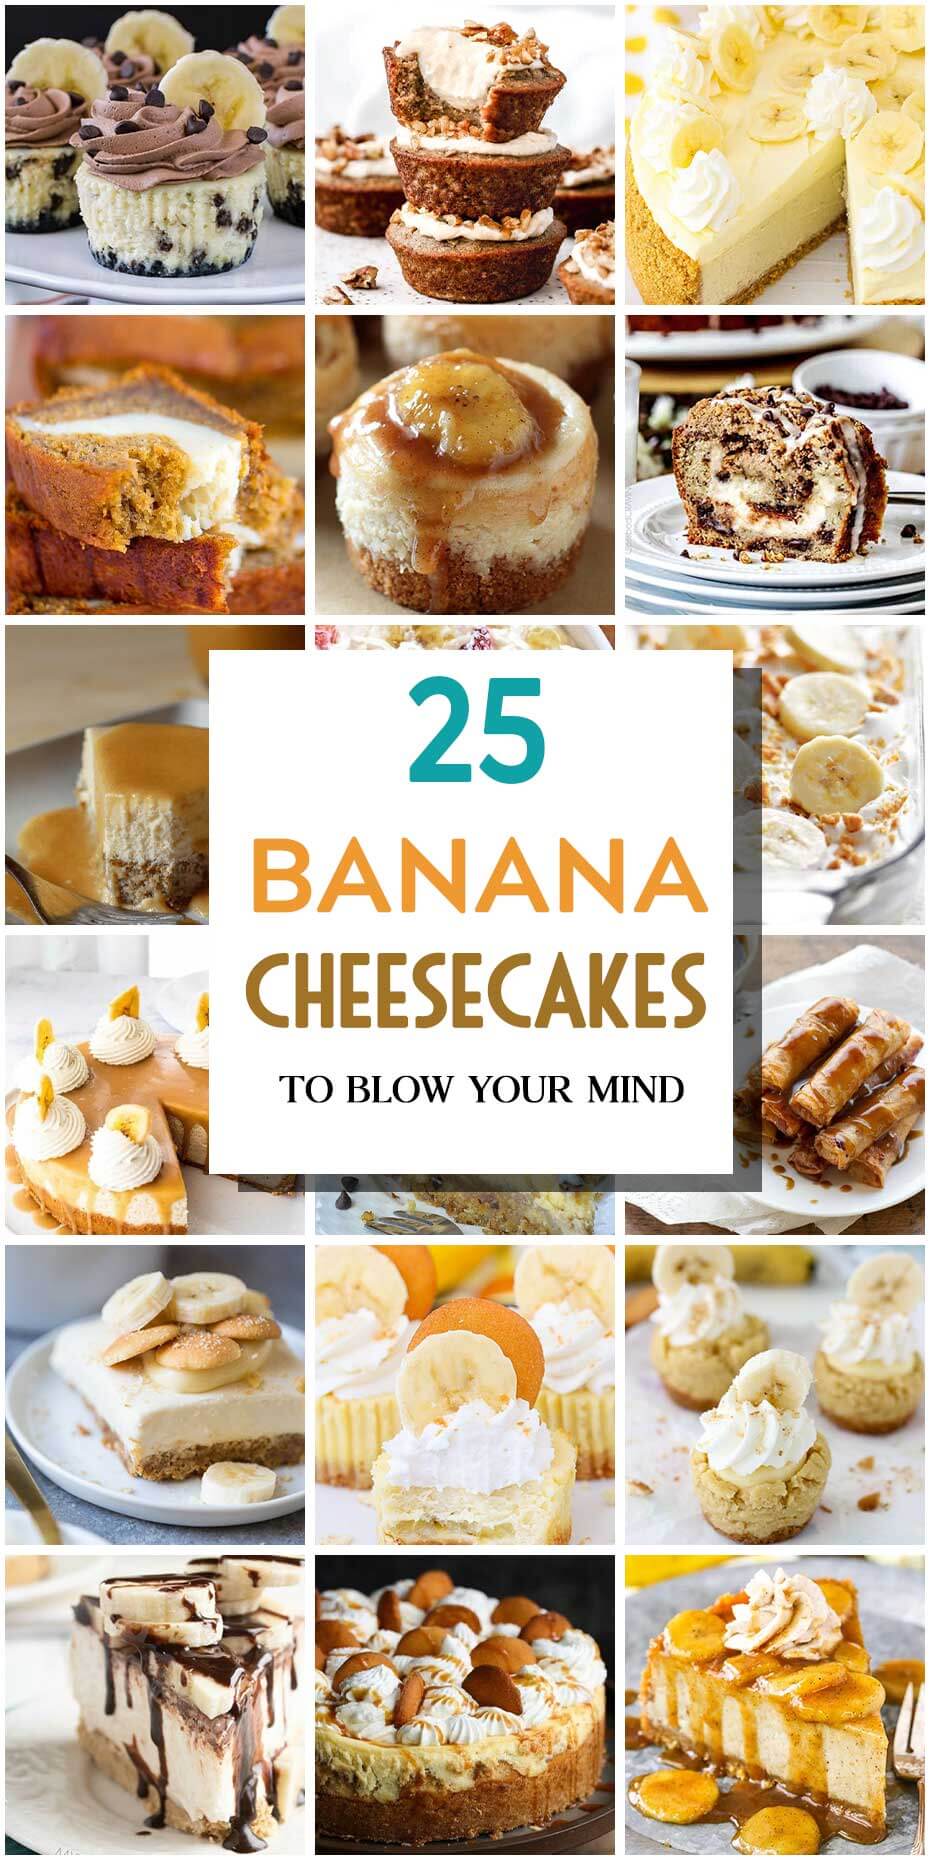 25 Banana Cheesecakes To Blow Your Mind